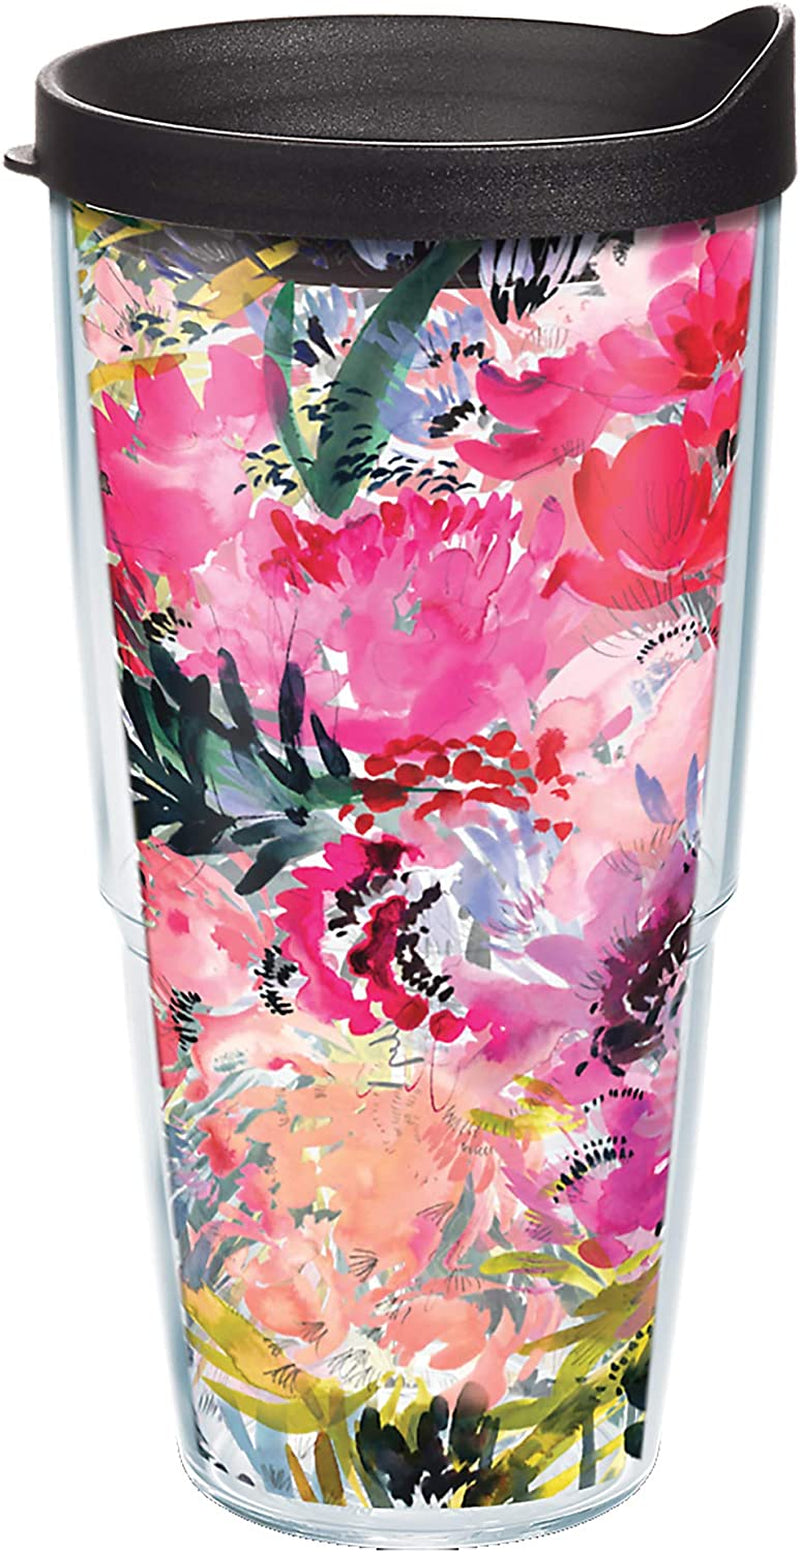 Tervis Made in USA Double Walled Kelly Ventura Floral Collection Insulated Tumbler Cup Keeps Drinks Cold & Hot, 16Oz 4Pk - Classic, Assorted Home & Garden > Kitchen & Dining > Tableware > Drinkware Tervis Perennial Garden 24oz - Classic 